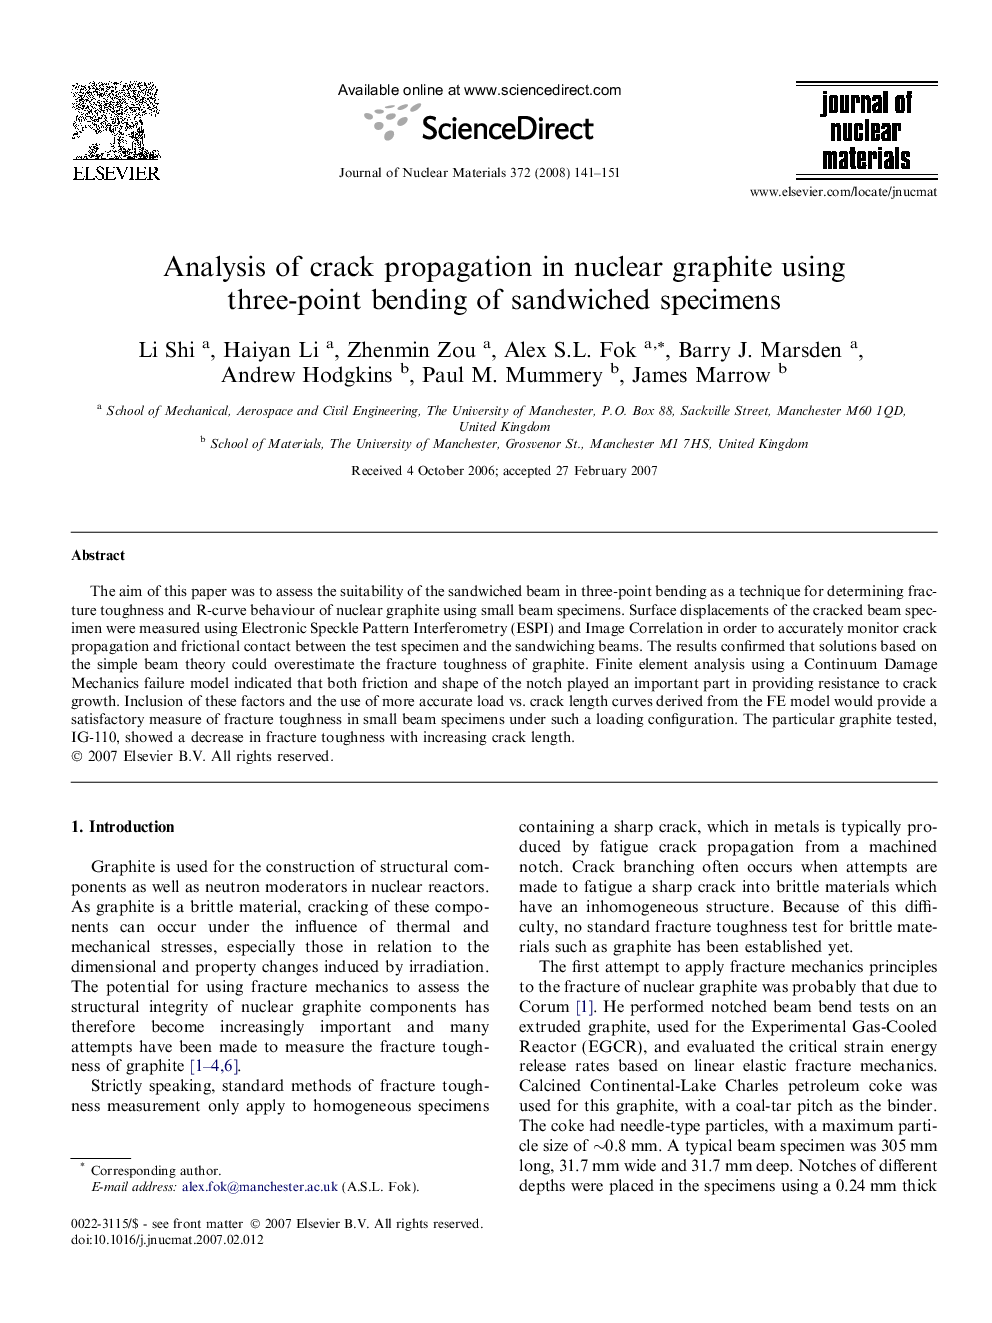 Analysis of crack propagation in nuclear graphite using three-point bending of sandwiched specimens